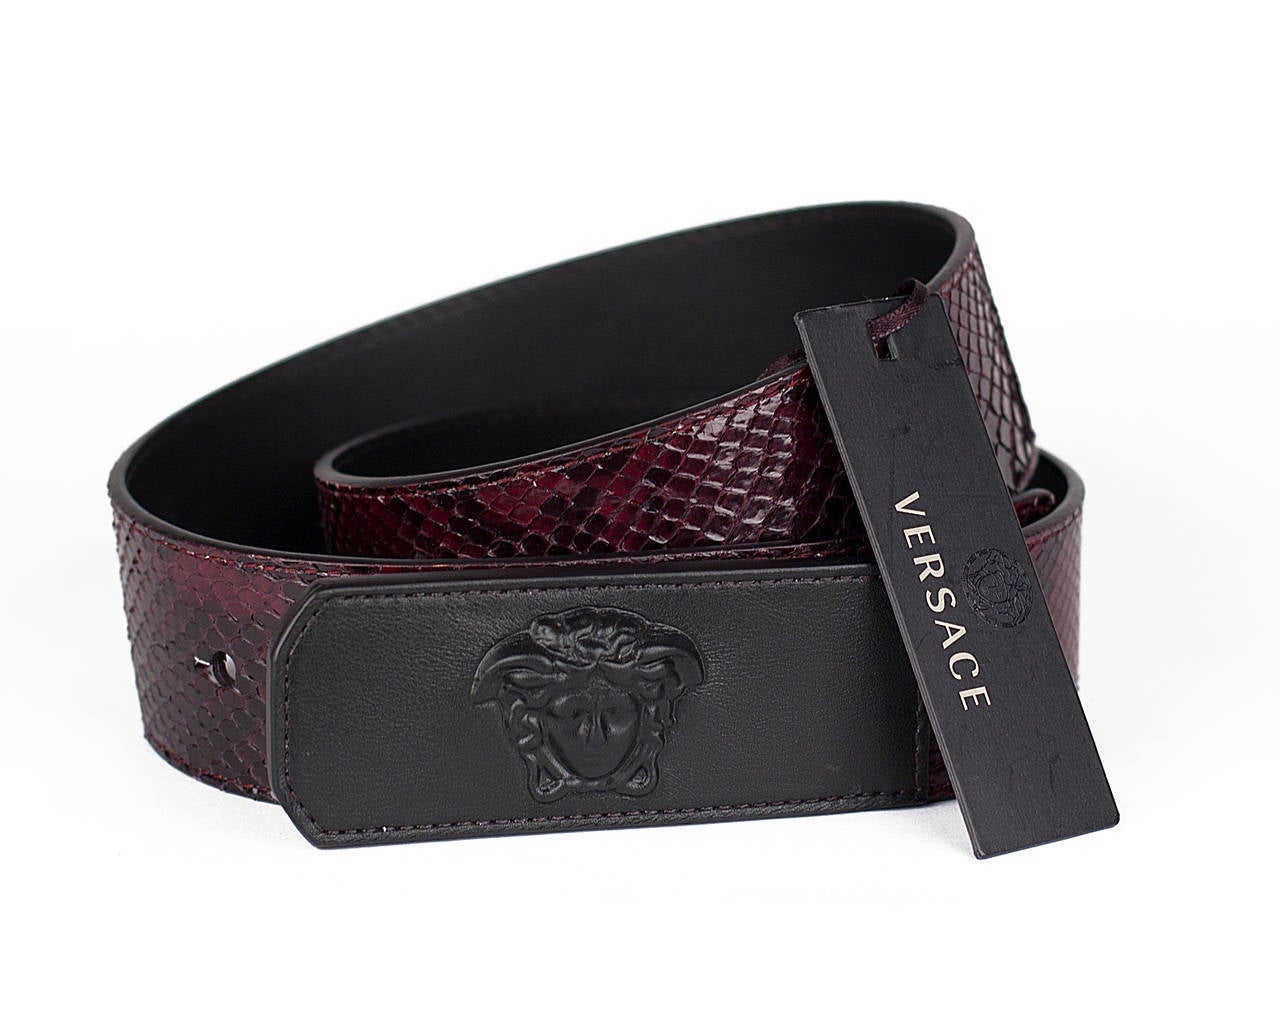 Versace

burgundy python

black leather Medusa buckle and lining

Made in Italy

2